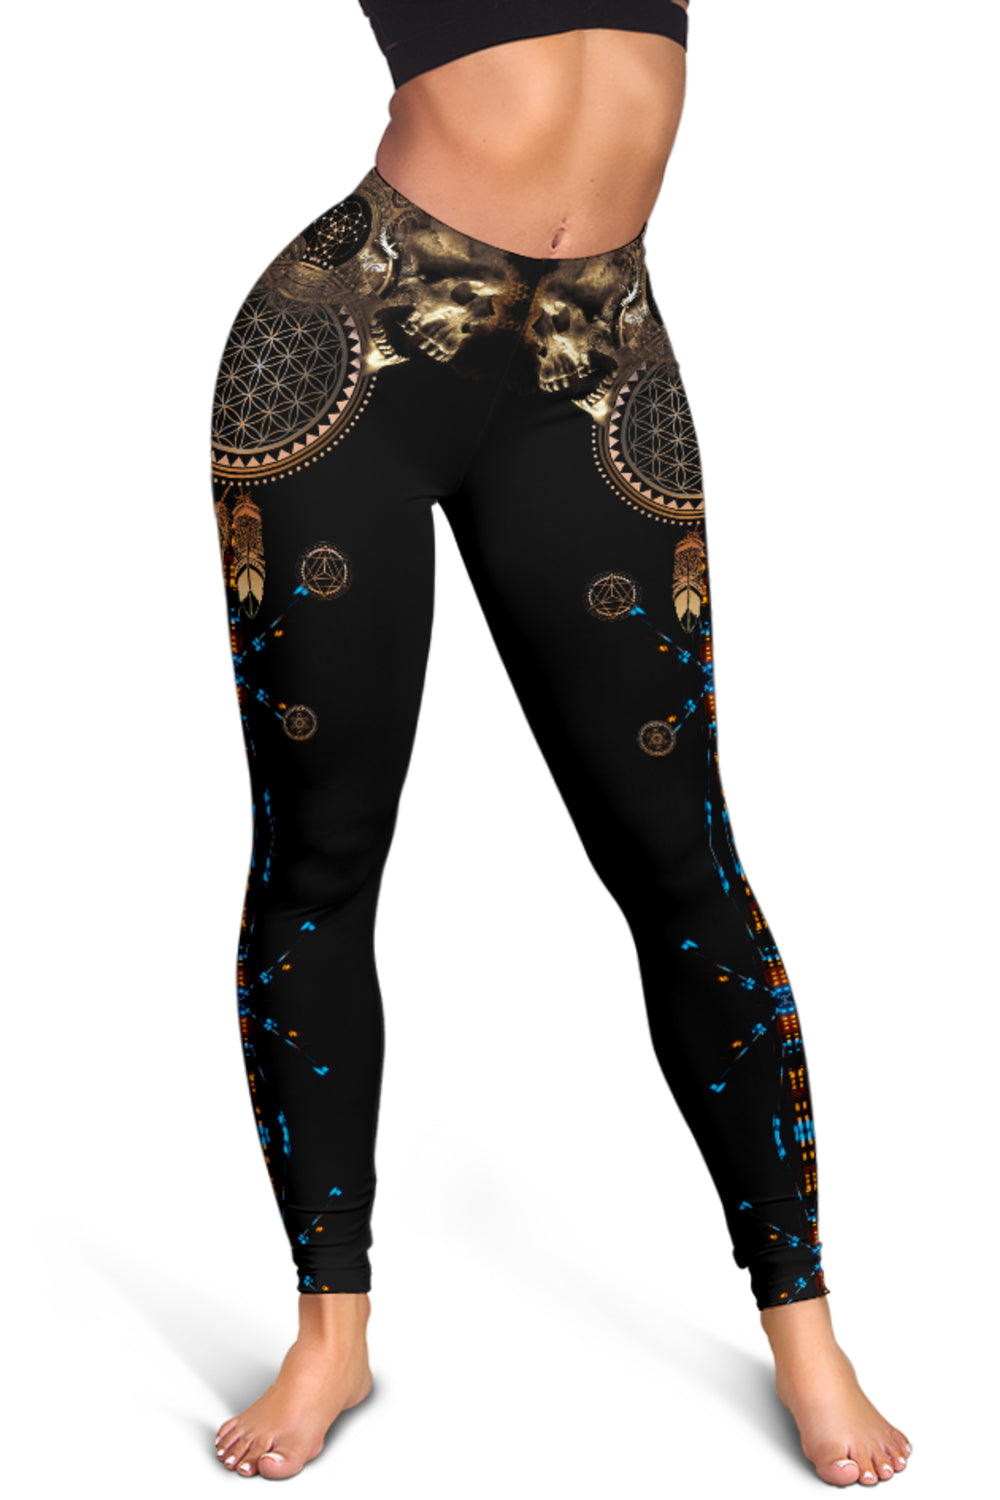 AfterLife | Womens Leggings by Cosmic Shiva